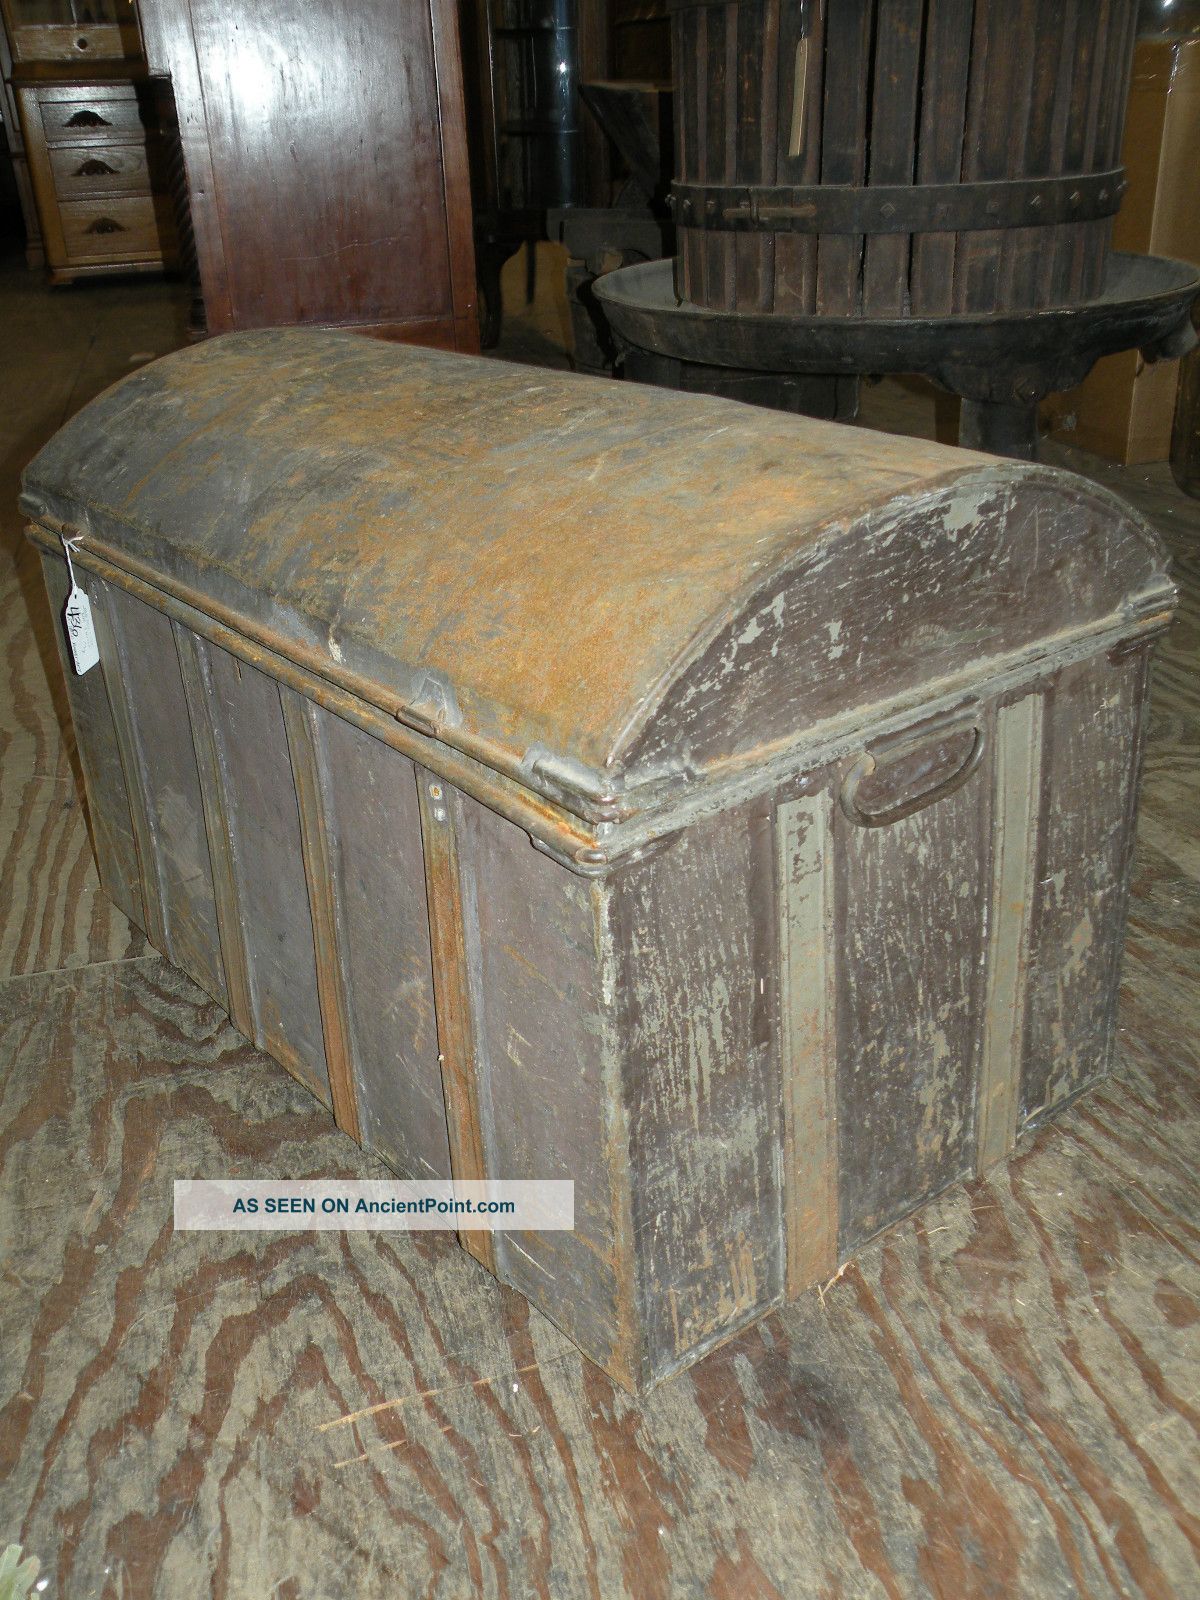 Antique Metal Dome Top Trunk Chest Civil War Era Liverpool To Ny 1850 1800-1899 photo